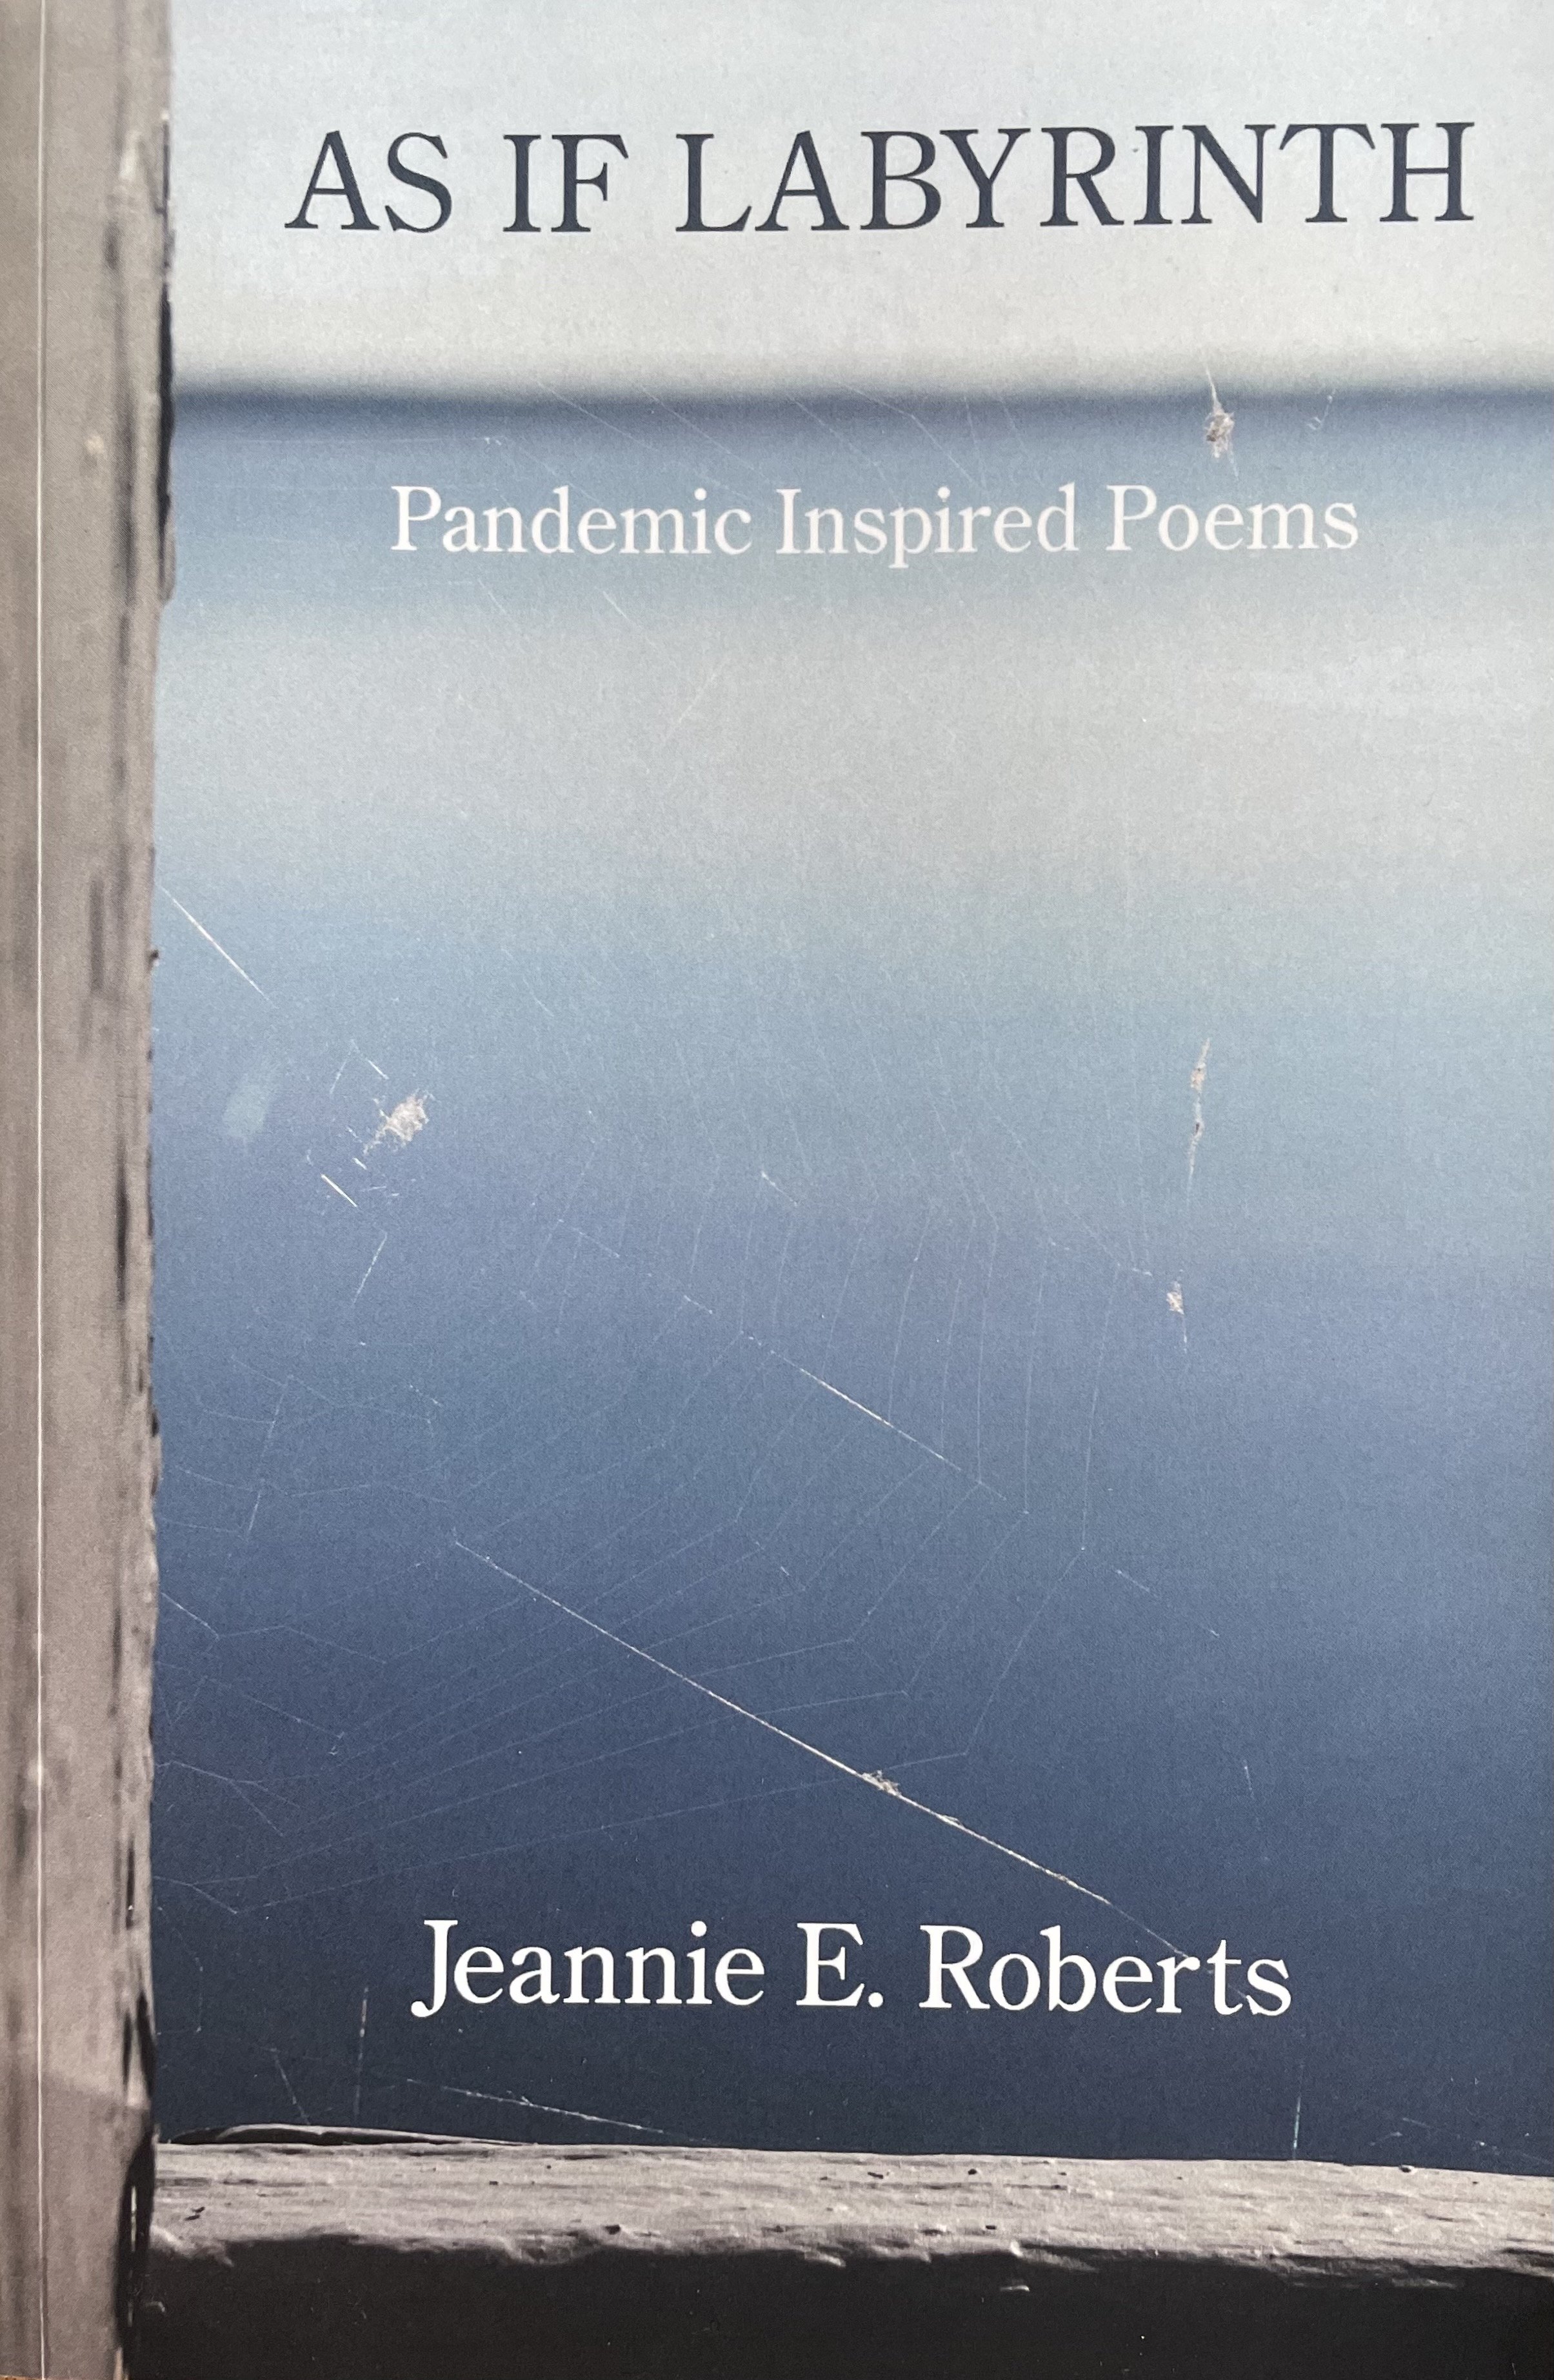 Book Cover_AS IF LABYRINTH - PANDEMIC INSPIRED POEMS_Jeannie E. Roberts.jpg